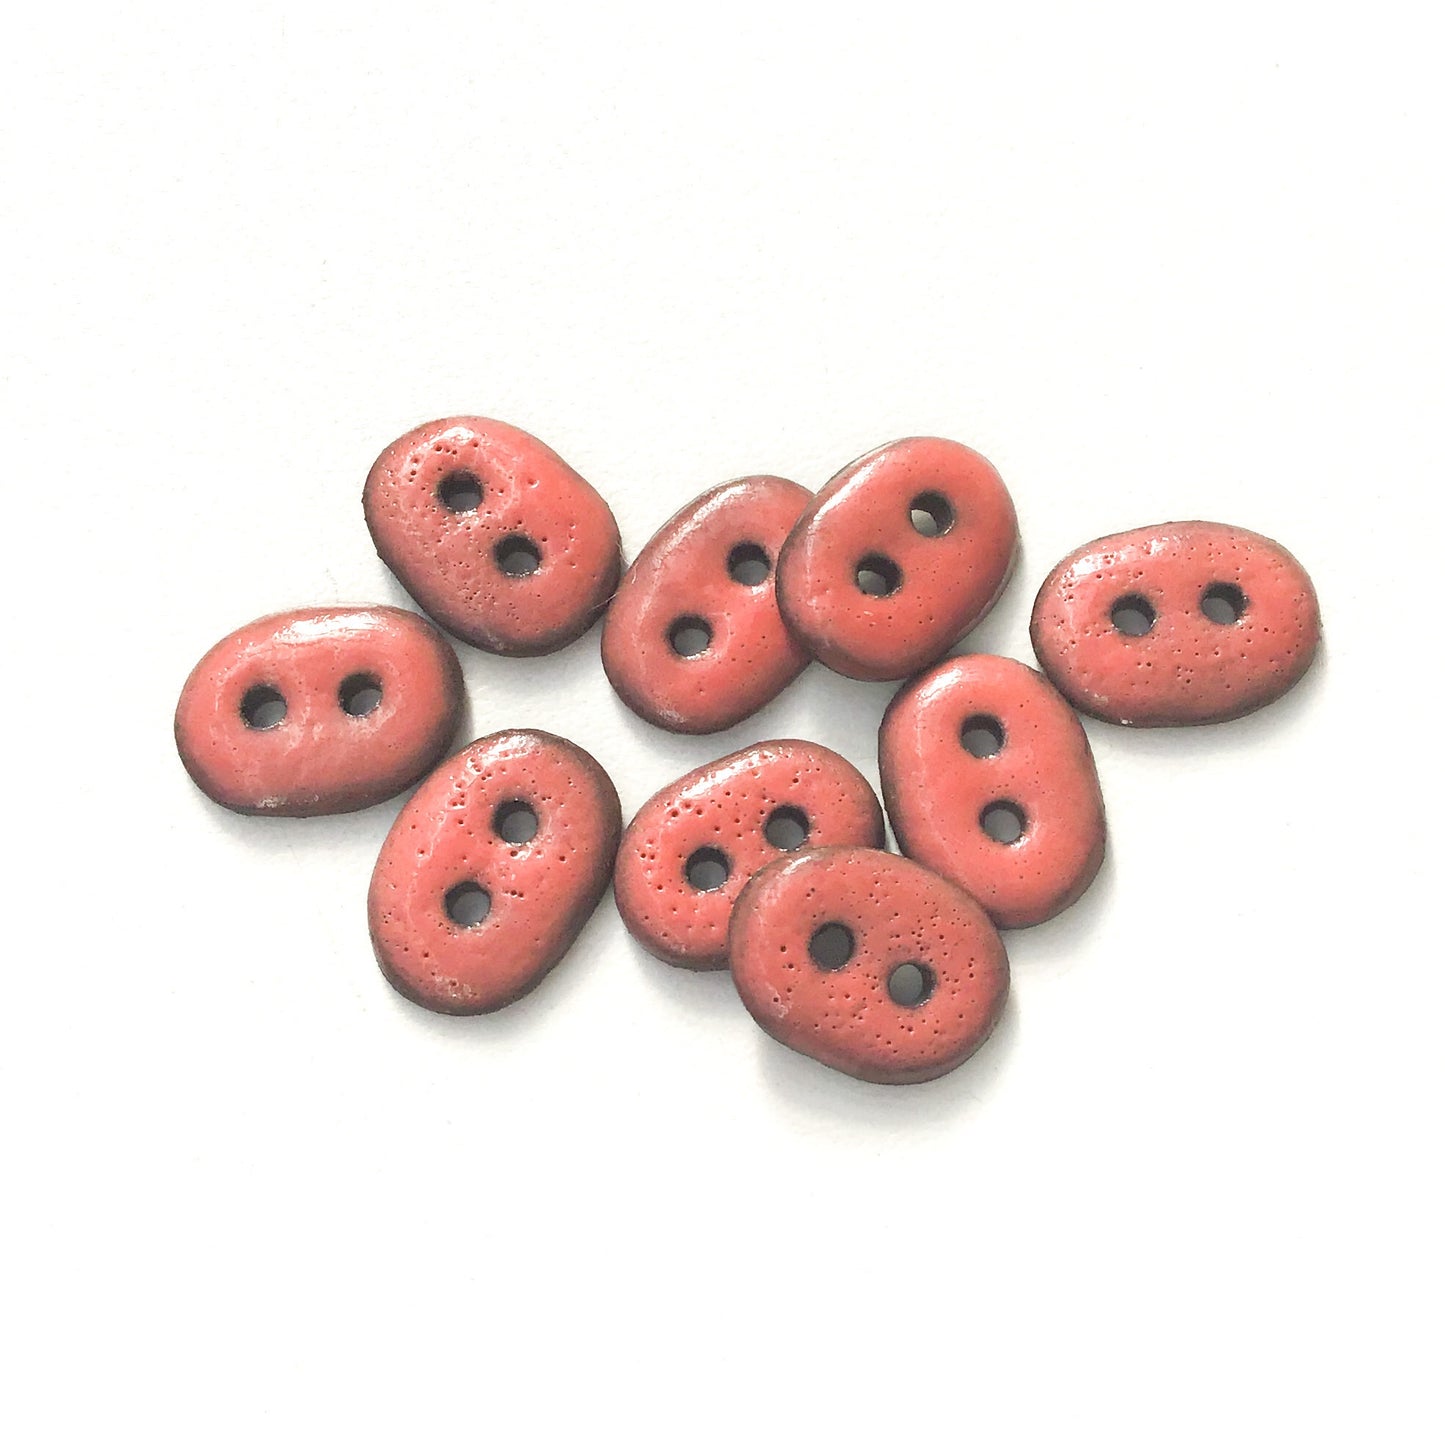 Coral Colored Ceramic Buttons - Small Oval Clay Buttons - 7/16" x  9/16" - 9 Pack (ws-56)